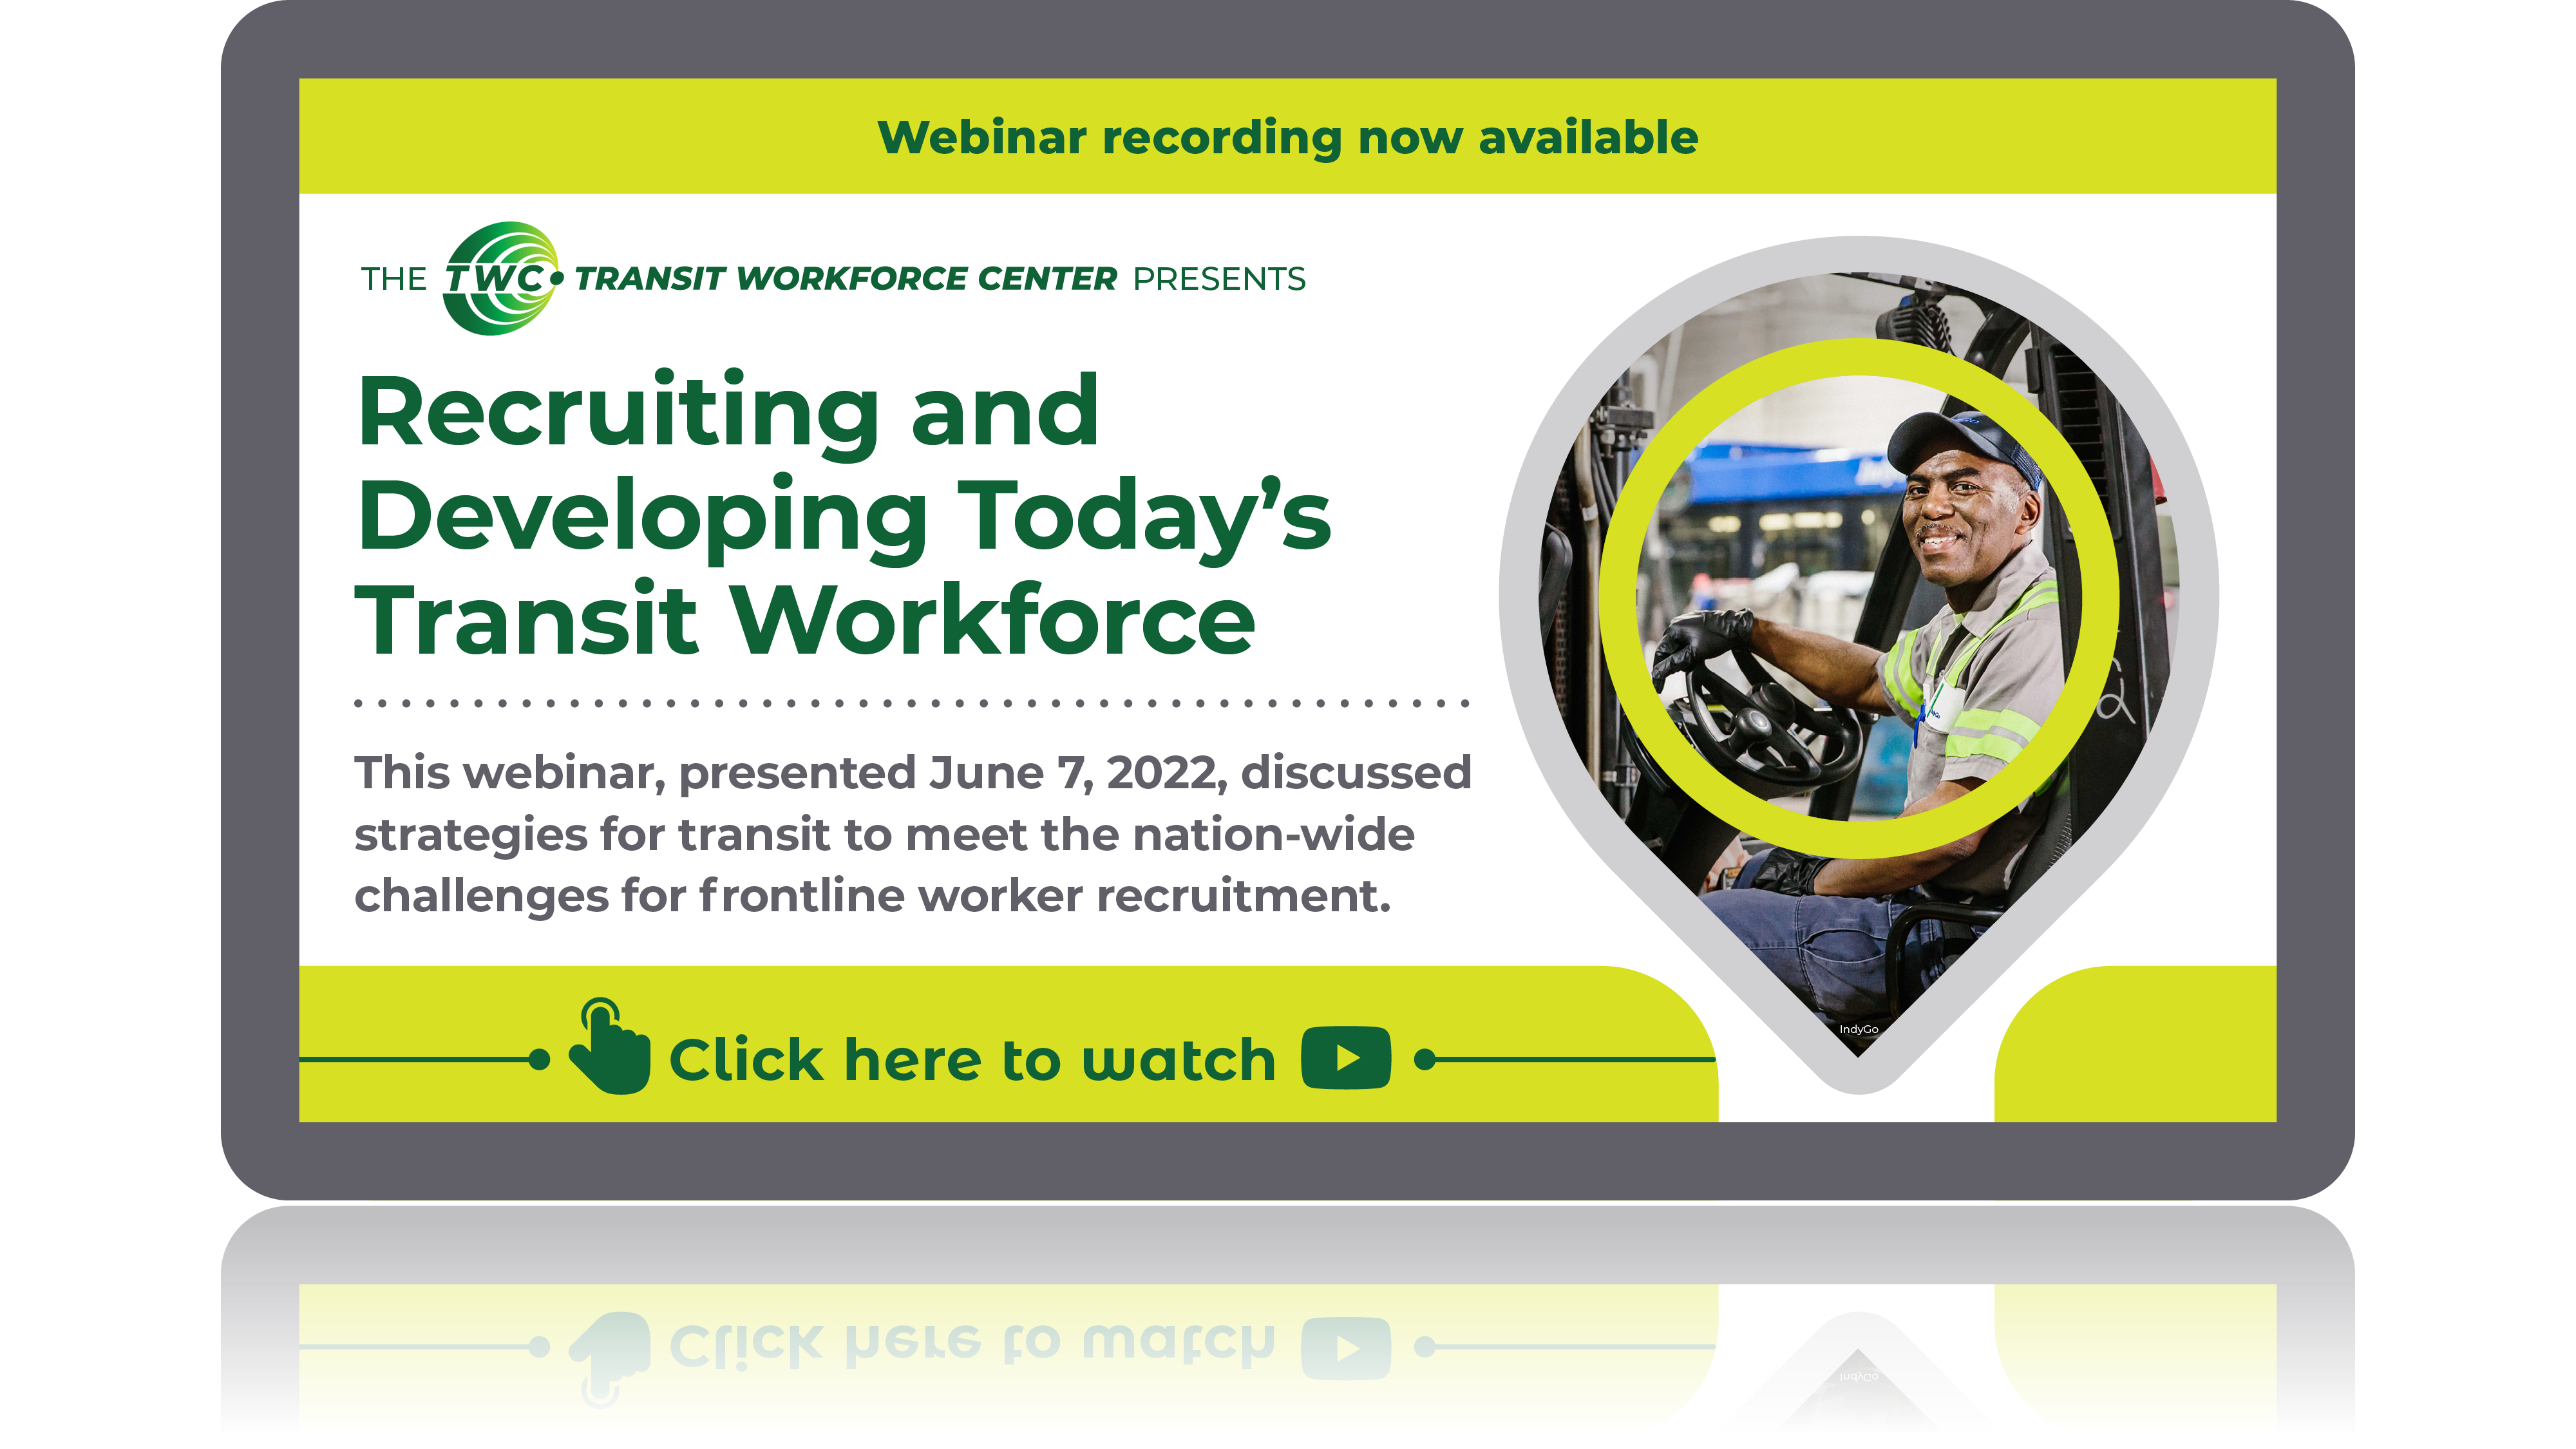 Video: Recruiting and Developing Today’s Transit Workforce Webinar